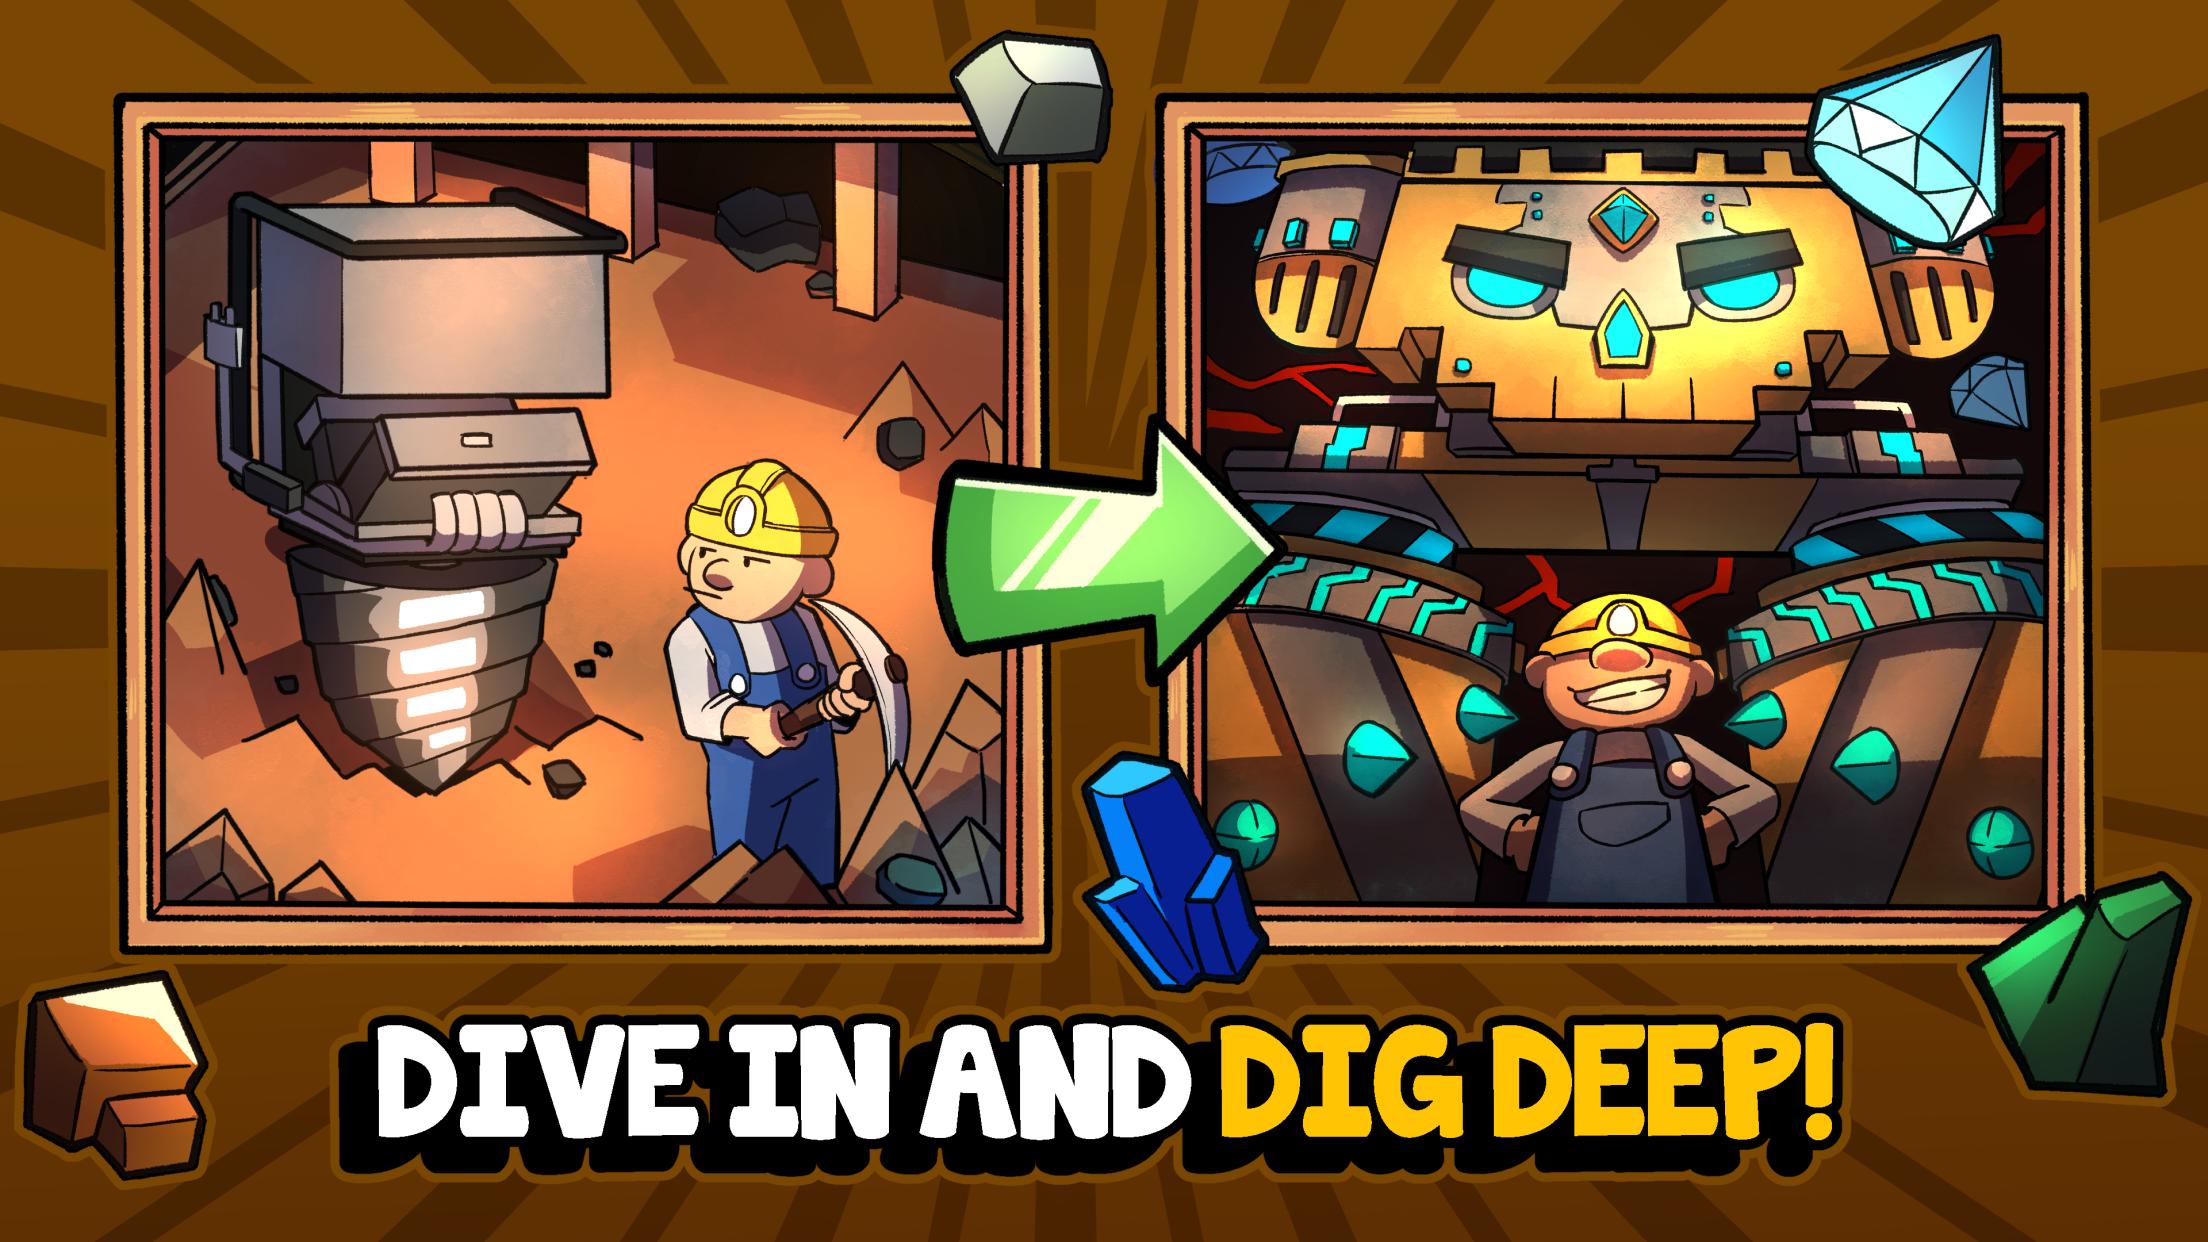 Miner Clicker: Idle Gold Mine Tycoon. Mining Game Game for Android